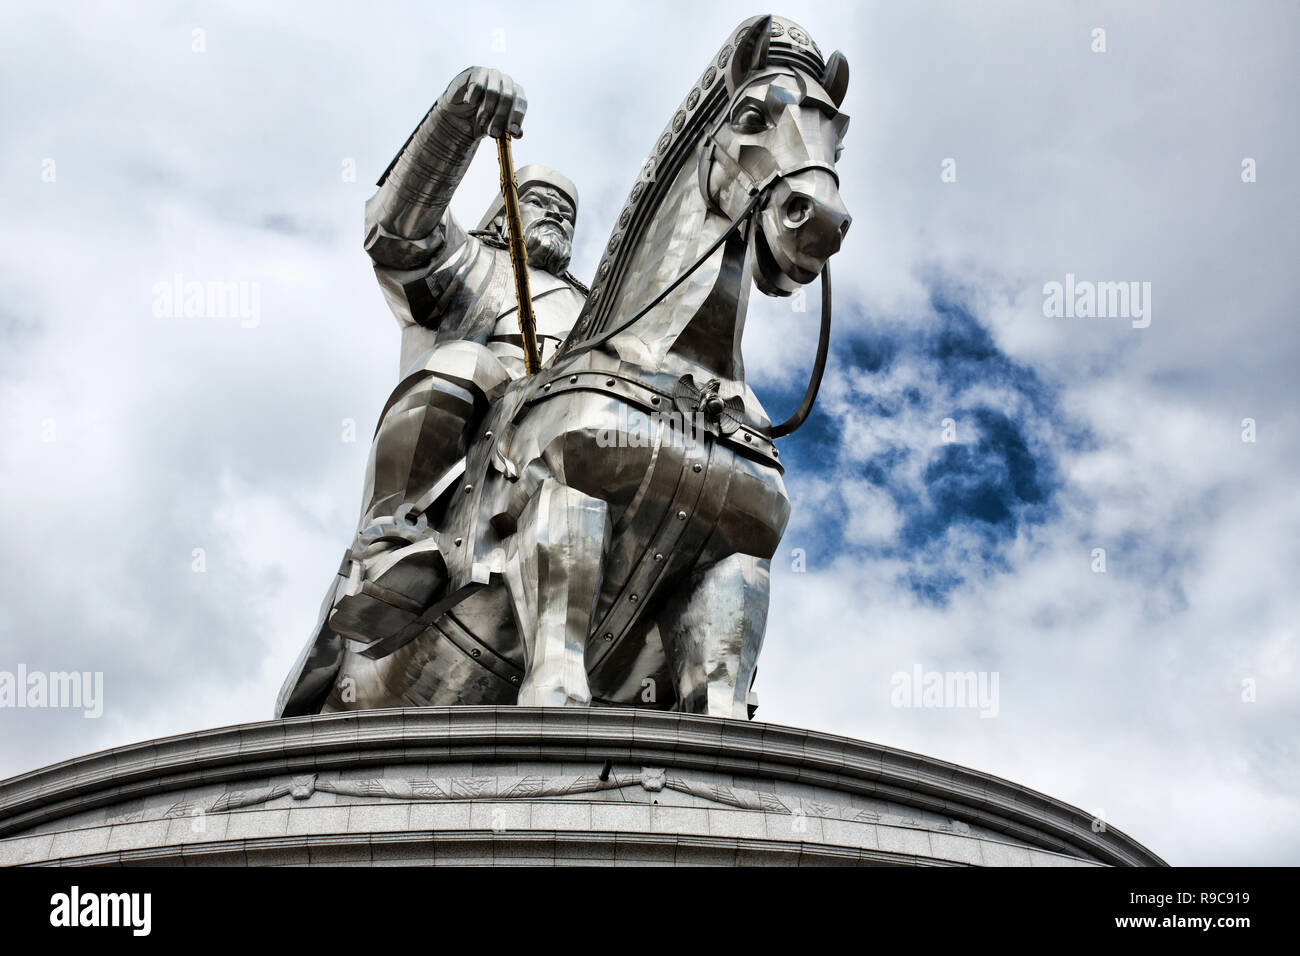 Genghis Khan Equestrian Statue in Mongolia Stock Photo